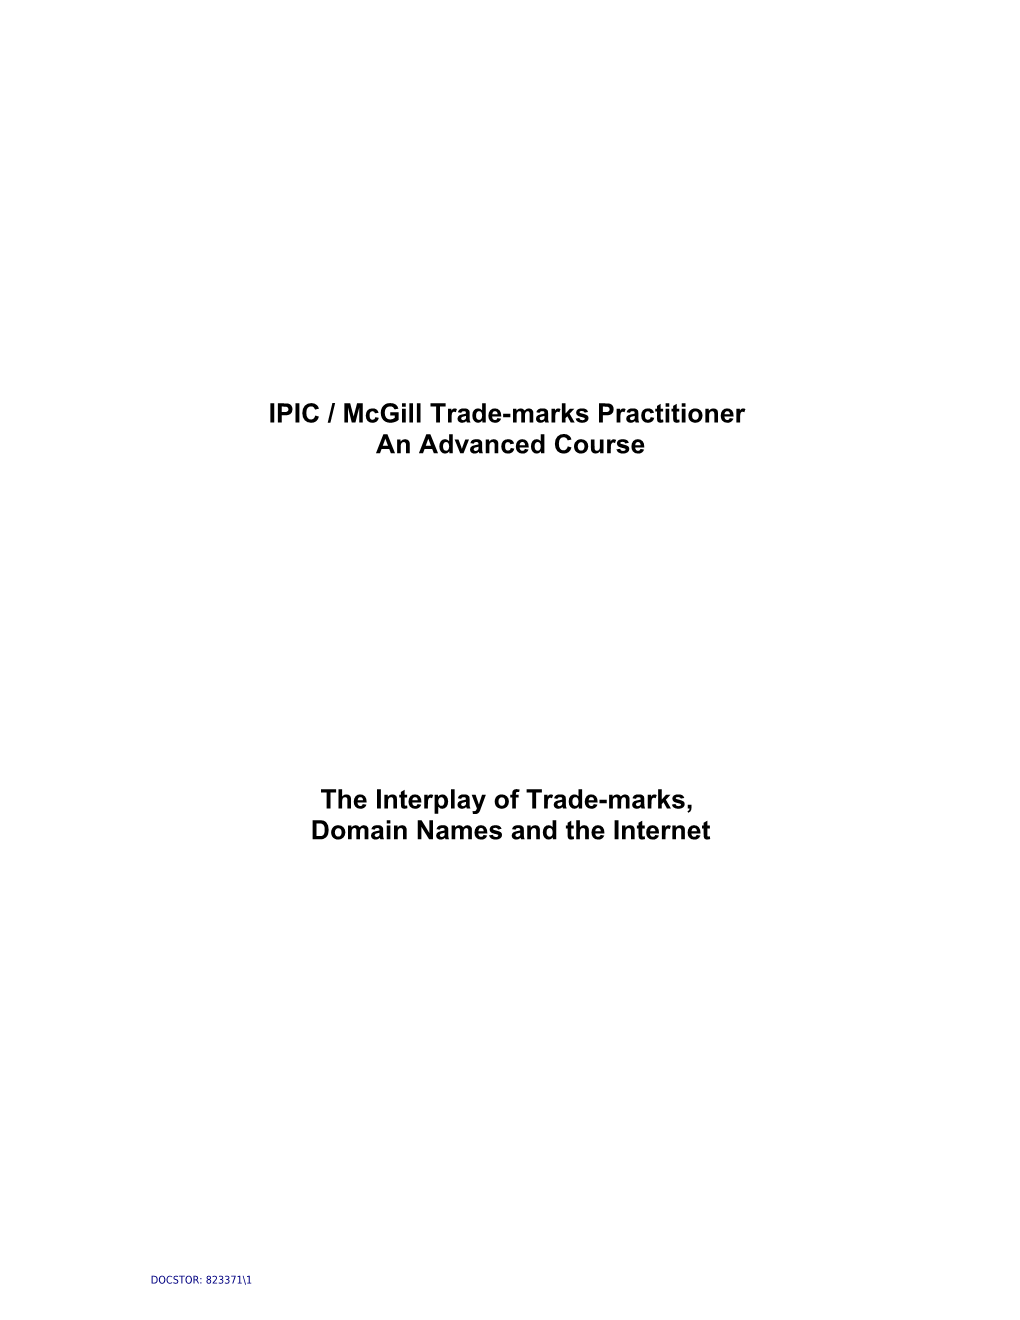 IPIC / Mcgill Trade-Marks Practitioner an Advanced Course